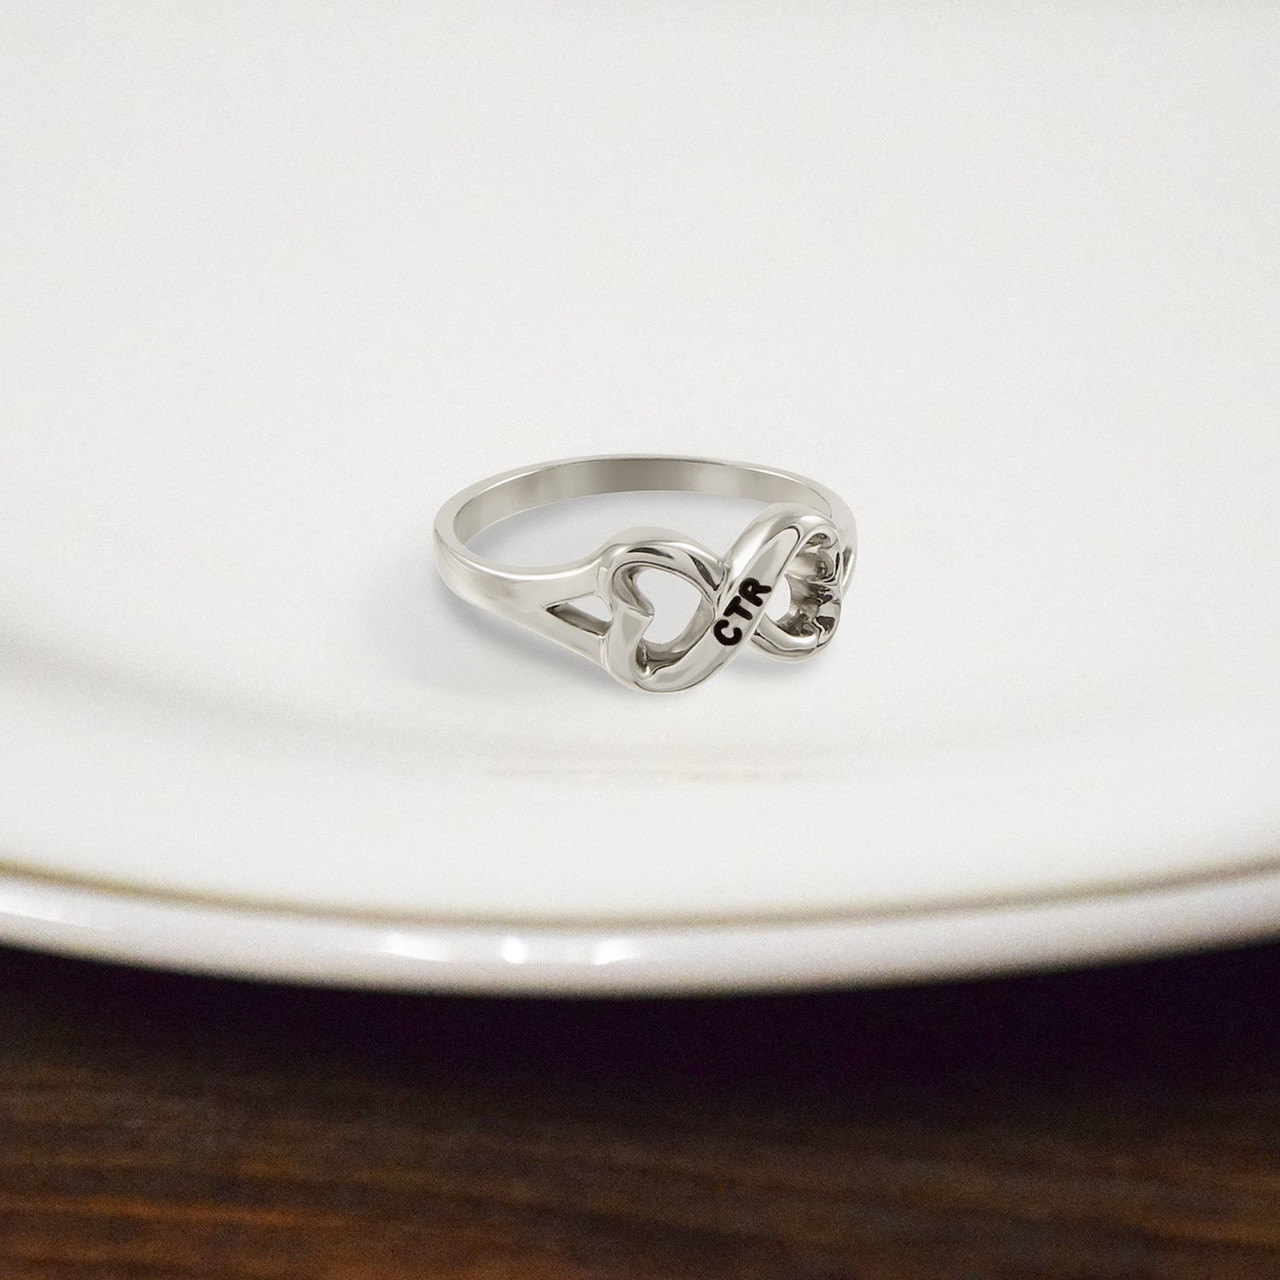 Heart to Heart CTR Ring (Stainless Steel) While supplies last*